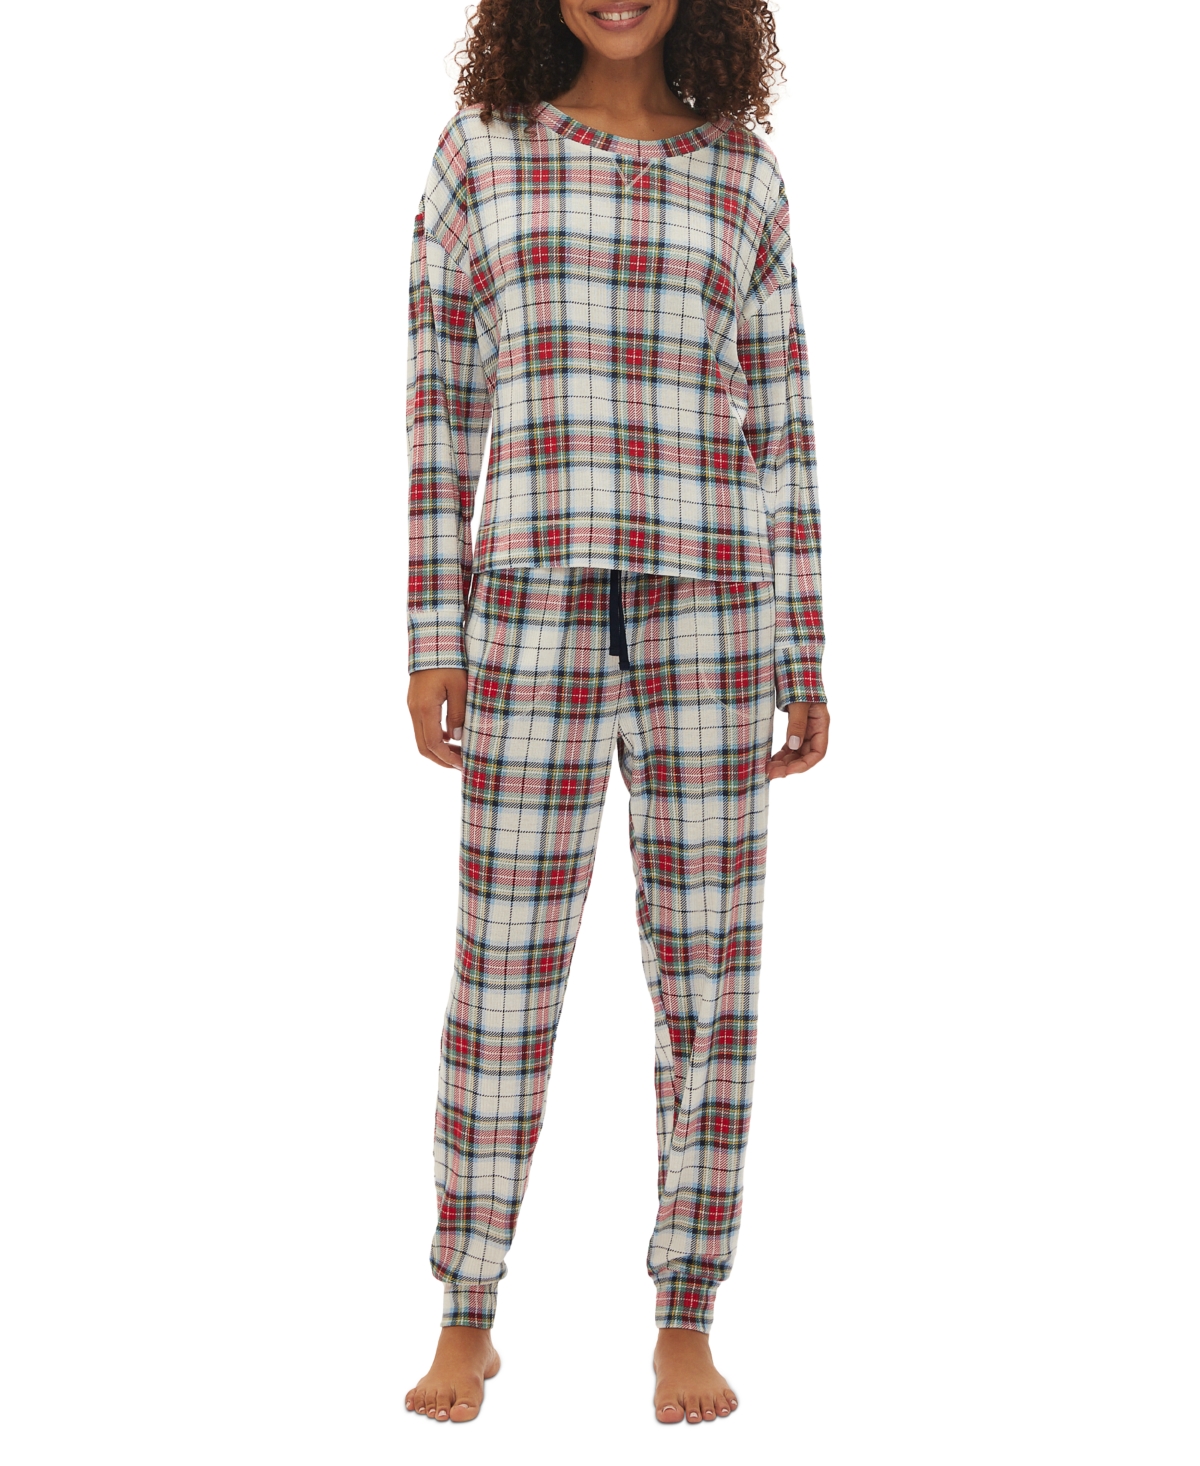 Gap Body Women's 2-pc. Packaged Long-sleeve Jogger Pajamas Set In Ivory Frost Plaid